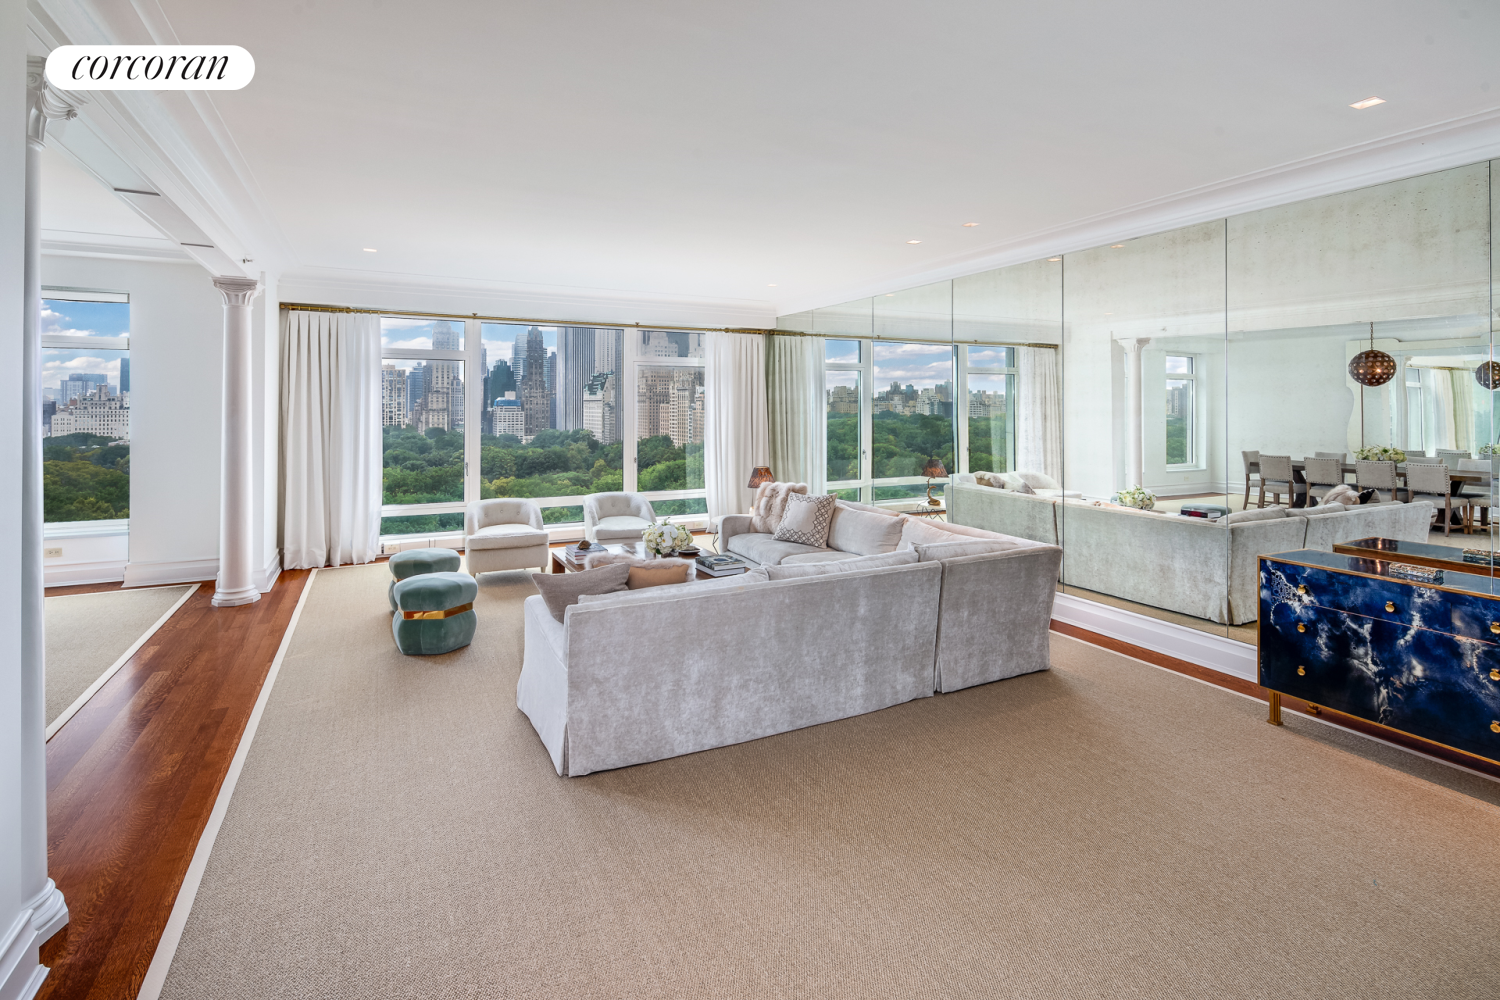 15 Central Park 15B, Lincoln Sq, Upper West Side, NYC - 4 Bedrooms  
3.5 Bathrooms  
7 Rooms - 